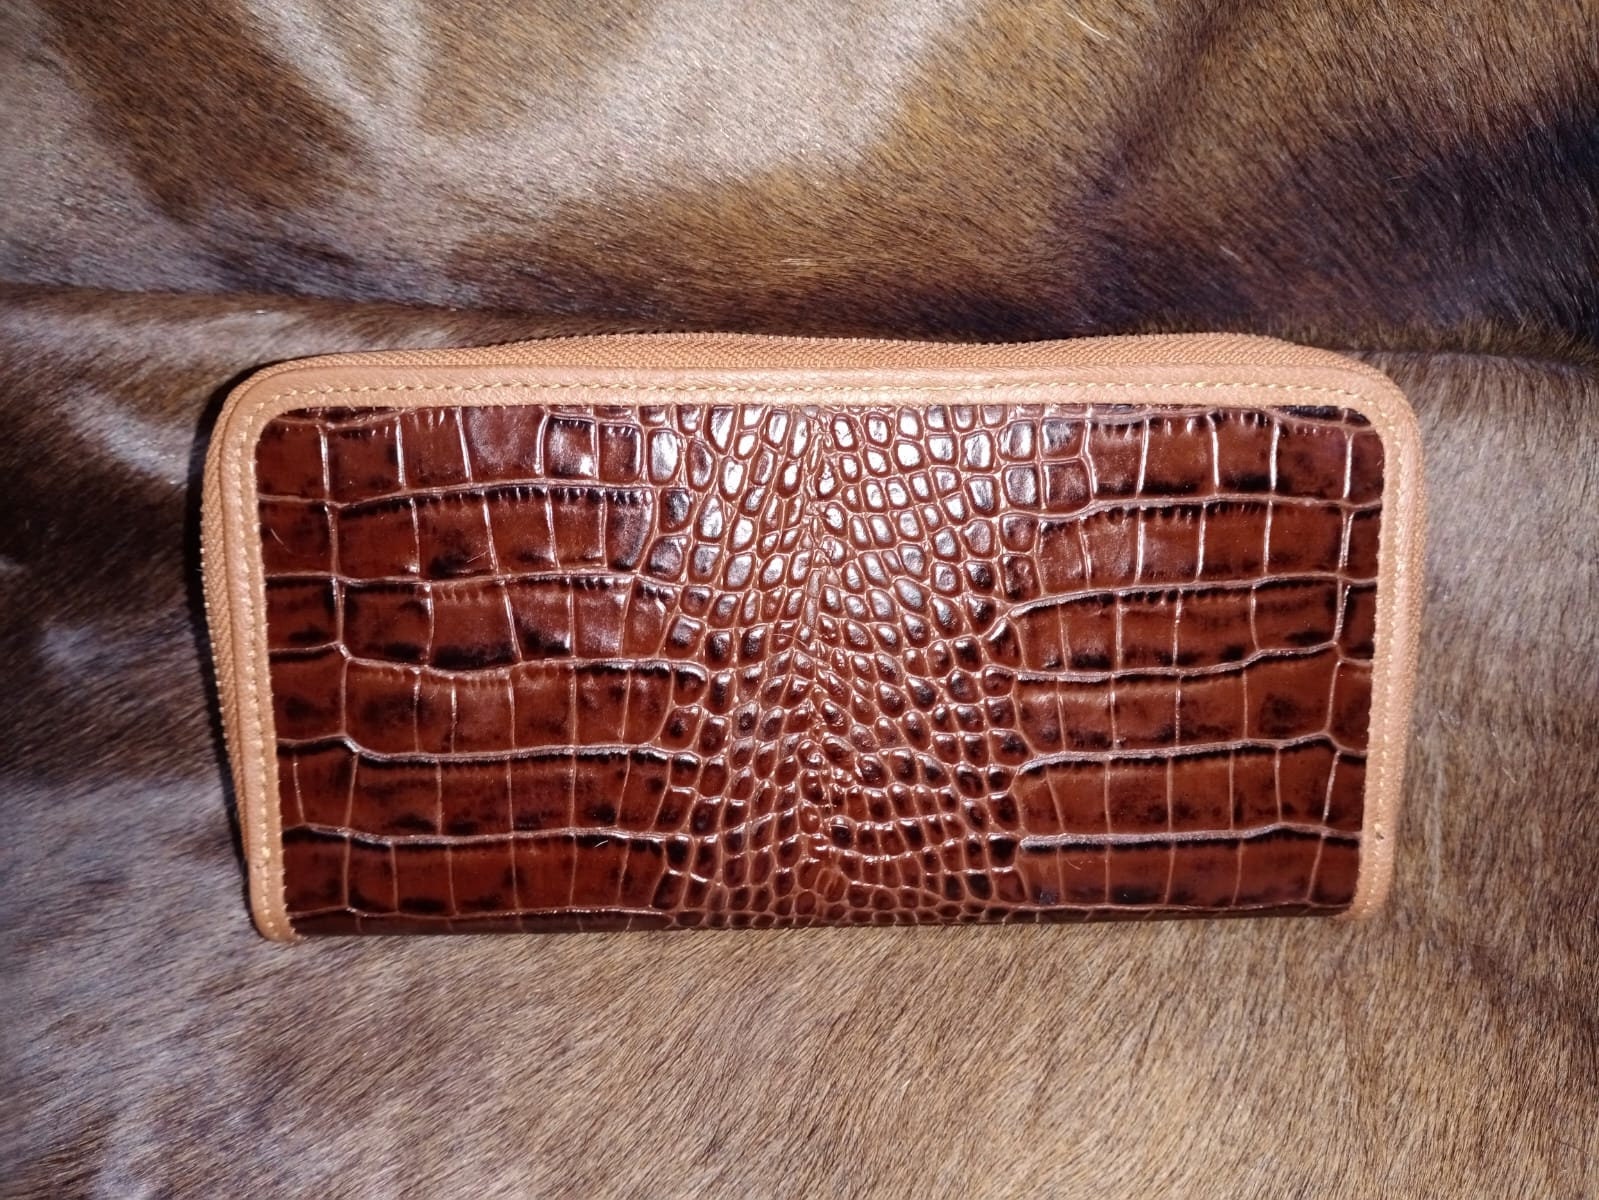 Copper Brown EMBOSSED CROCODILE LEATHER : Genuine Leather 2.5-3 oz. -  Perfect for Handbags and Leather Crafts!